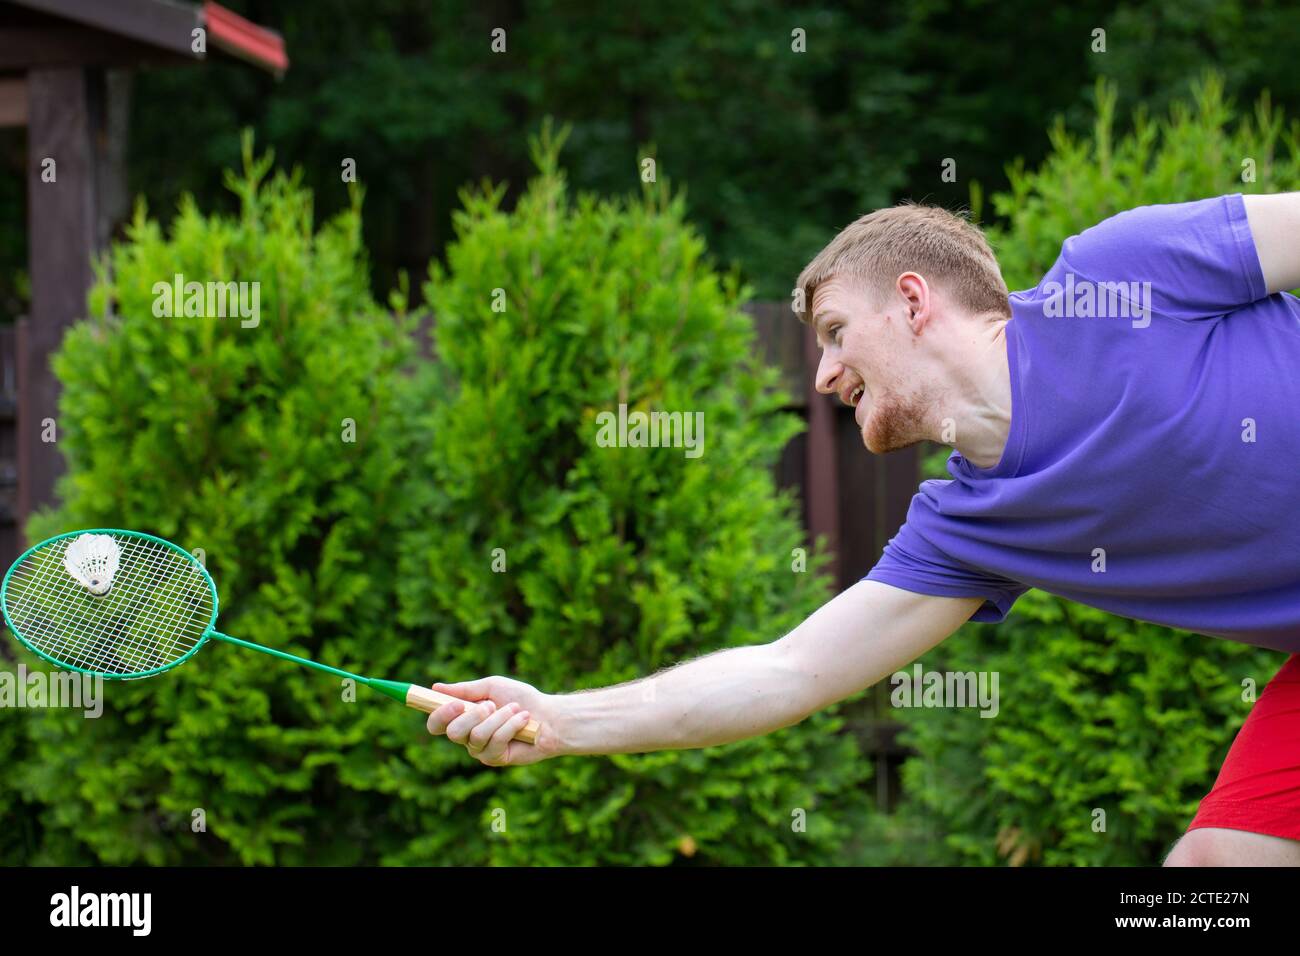 Badminton player with racket in action. Young guy playing badminton  outdoors Stock Photo - Alamy